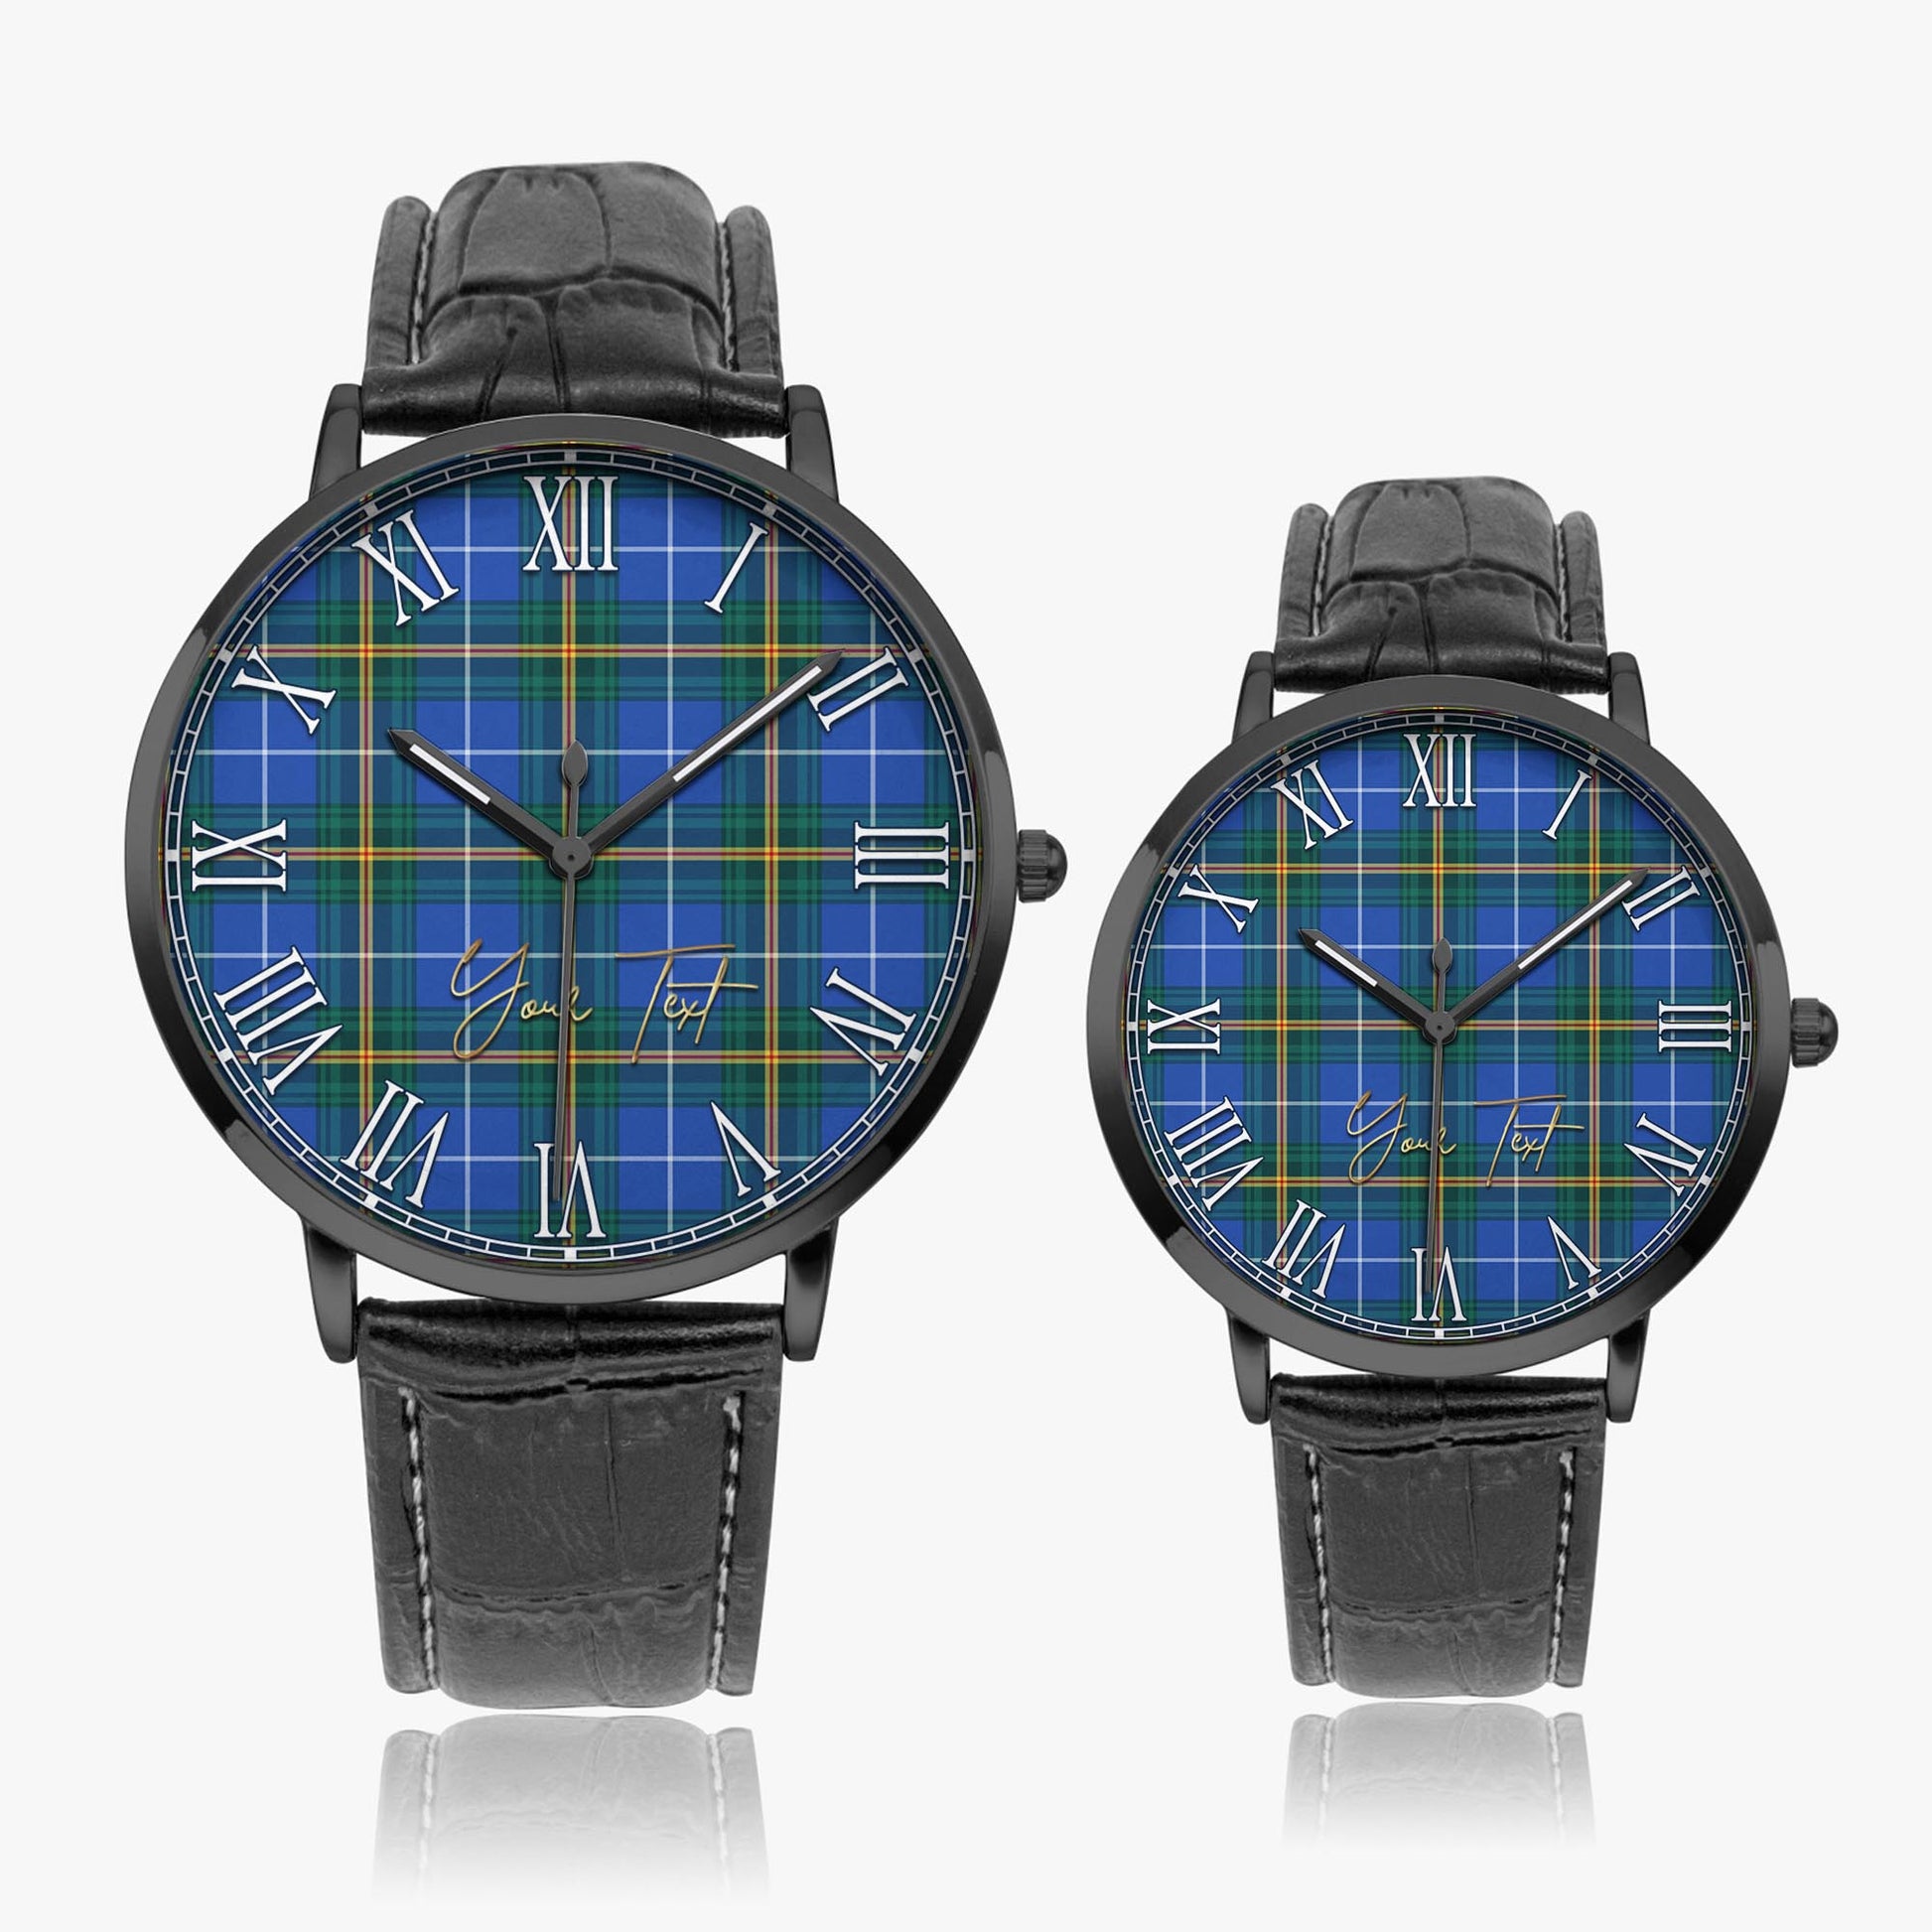 Nova Scotia Province Canada Tartan Personalized Your Text Leather Trap Quartz Watch Ultra Thin Black Case With Black Leather Strap - Tartanvibesclothing